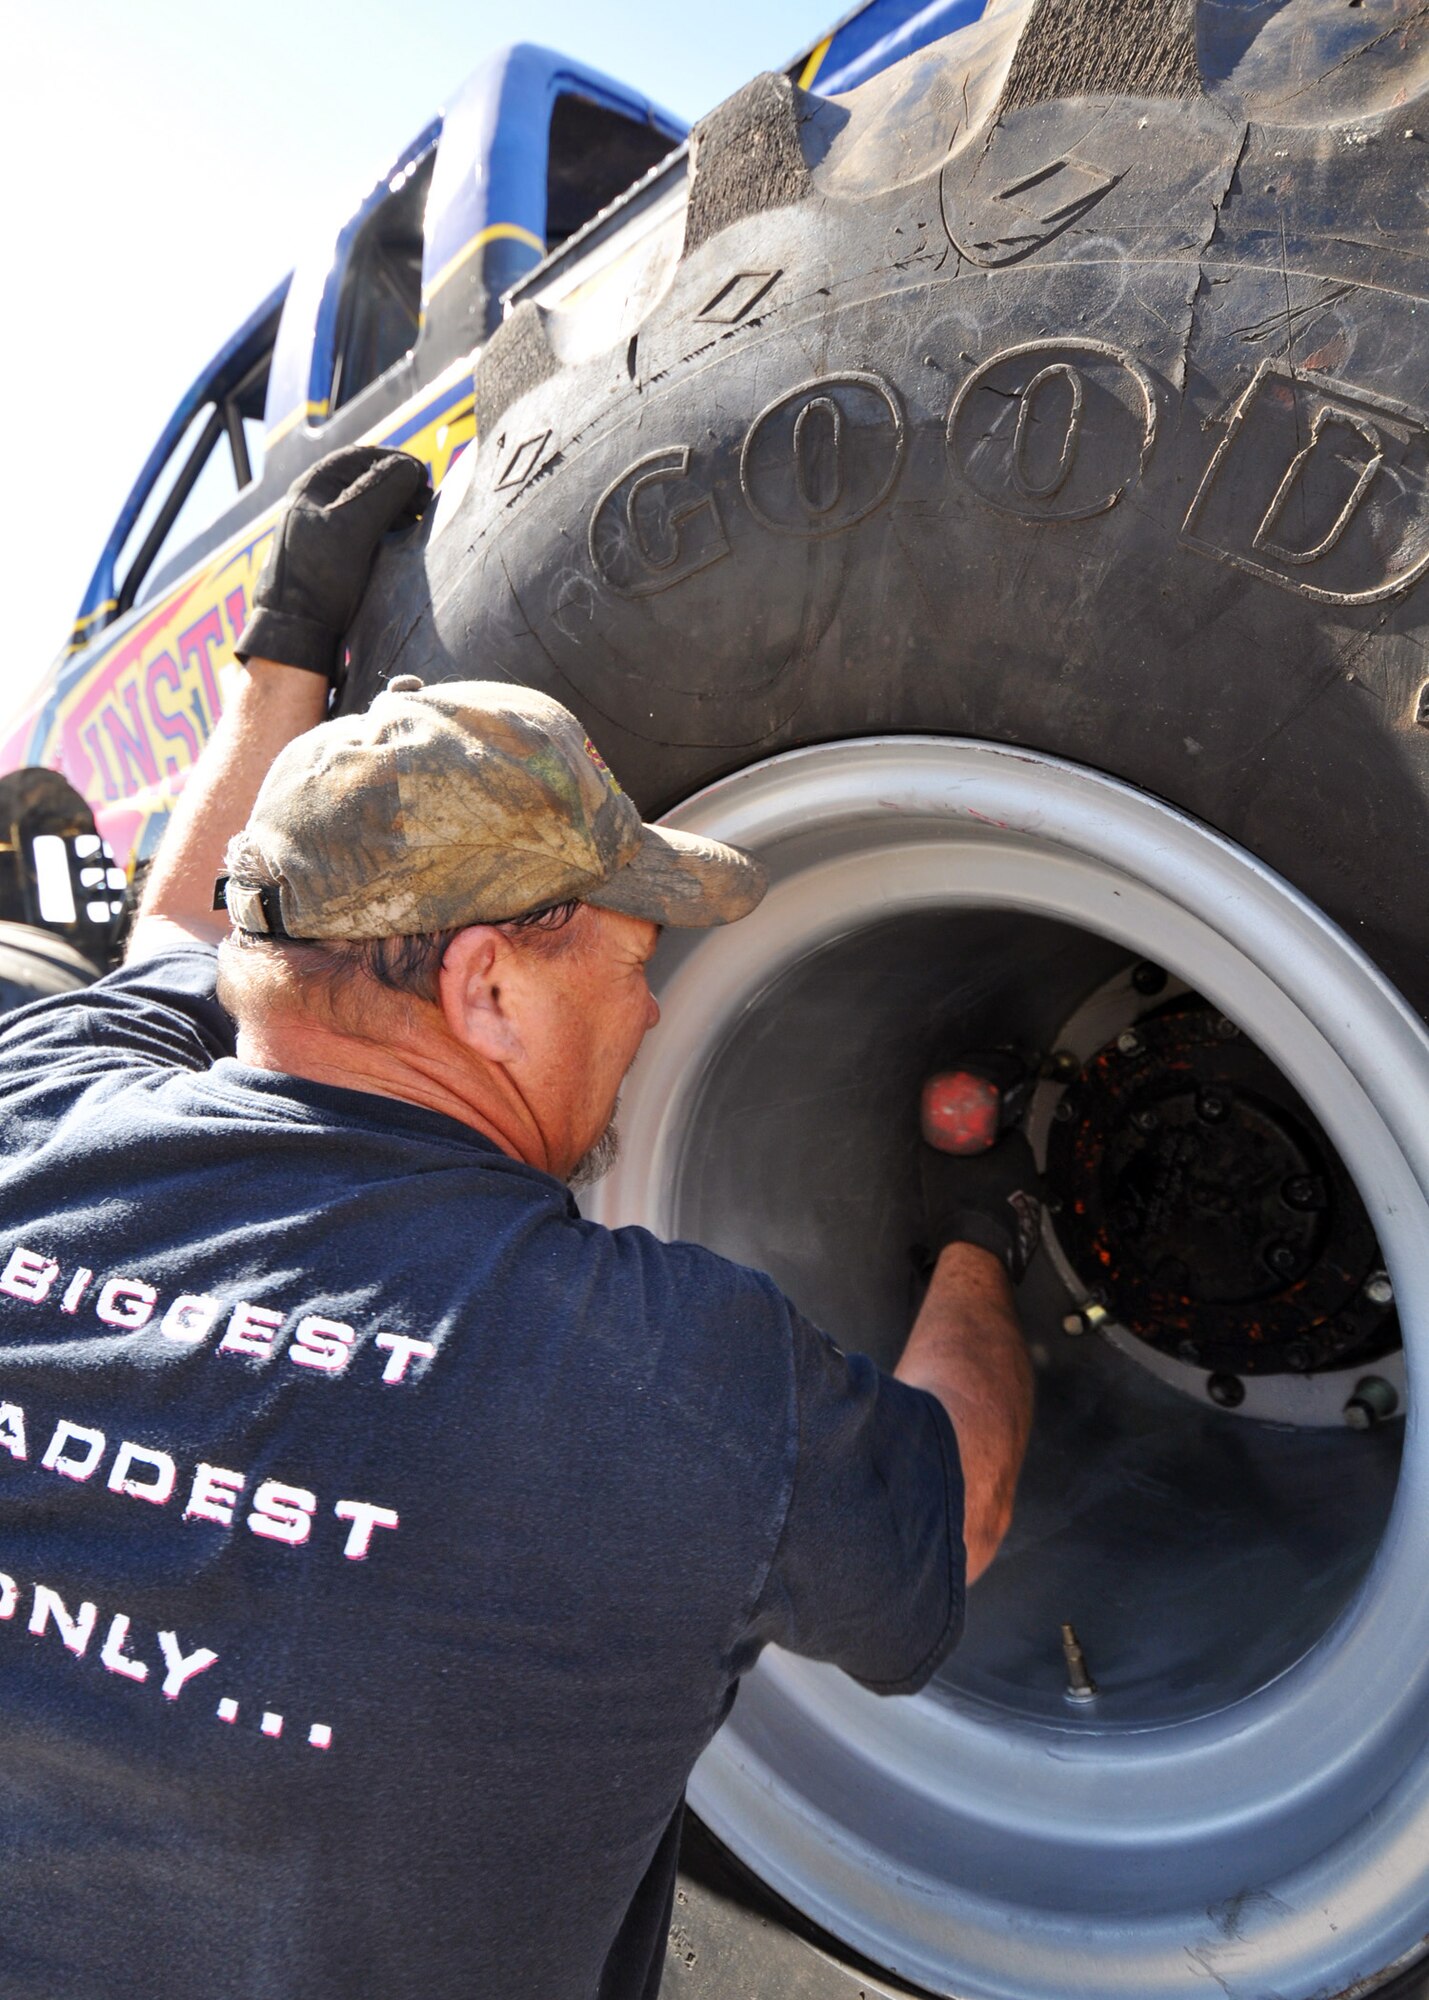 Lionel Easler tightens down the lugs on "monster" tires of his truck "The Instigator," April 9 in preparation for the weekend airshow at Eglin Air Force Base, Fla.  The truck was on display with the Air Force Reserve recruiting booth.  Mr. Easler has been driving monster trucks for five years and competes in about 35 truck shows a year.  This was the first airshow however for the Florida native.  (U.S. Air Force photo/Tech. Sgt. Samuel King Jr.)(U.S. Air Force photo/Tech. Sgt. Samuel King Jr.)